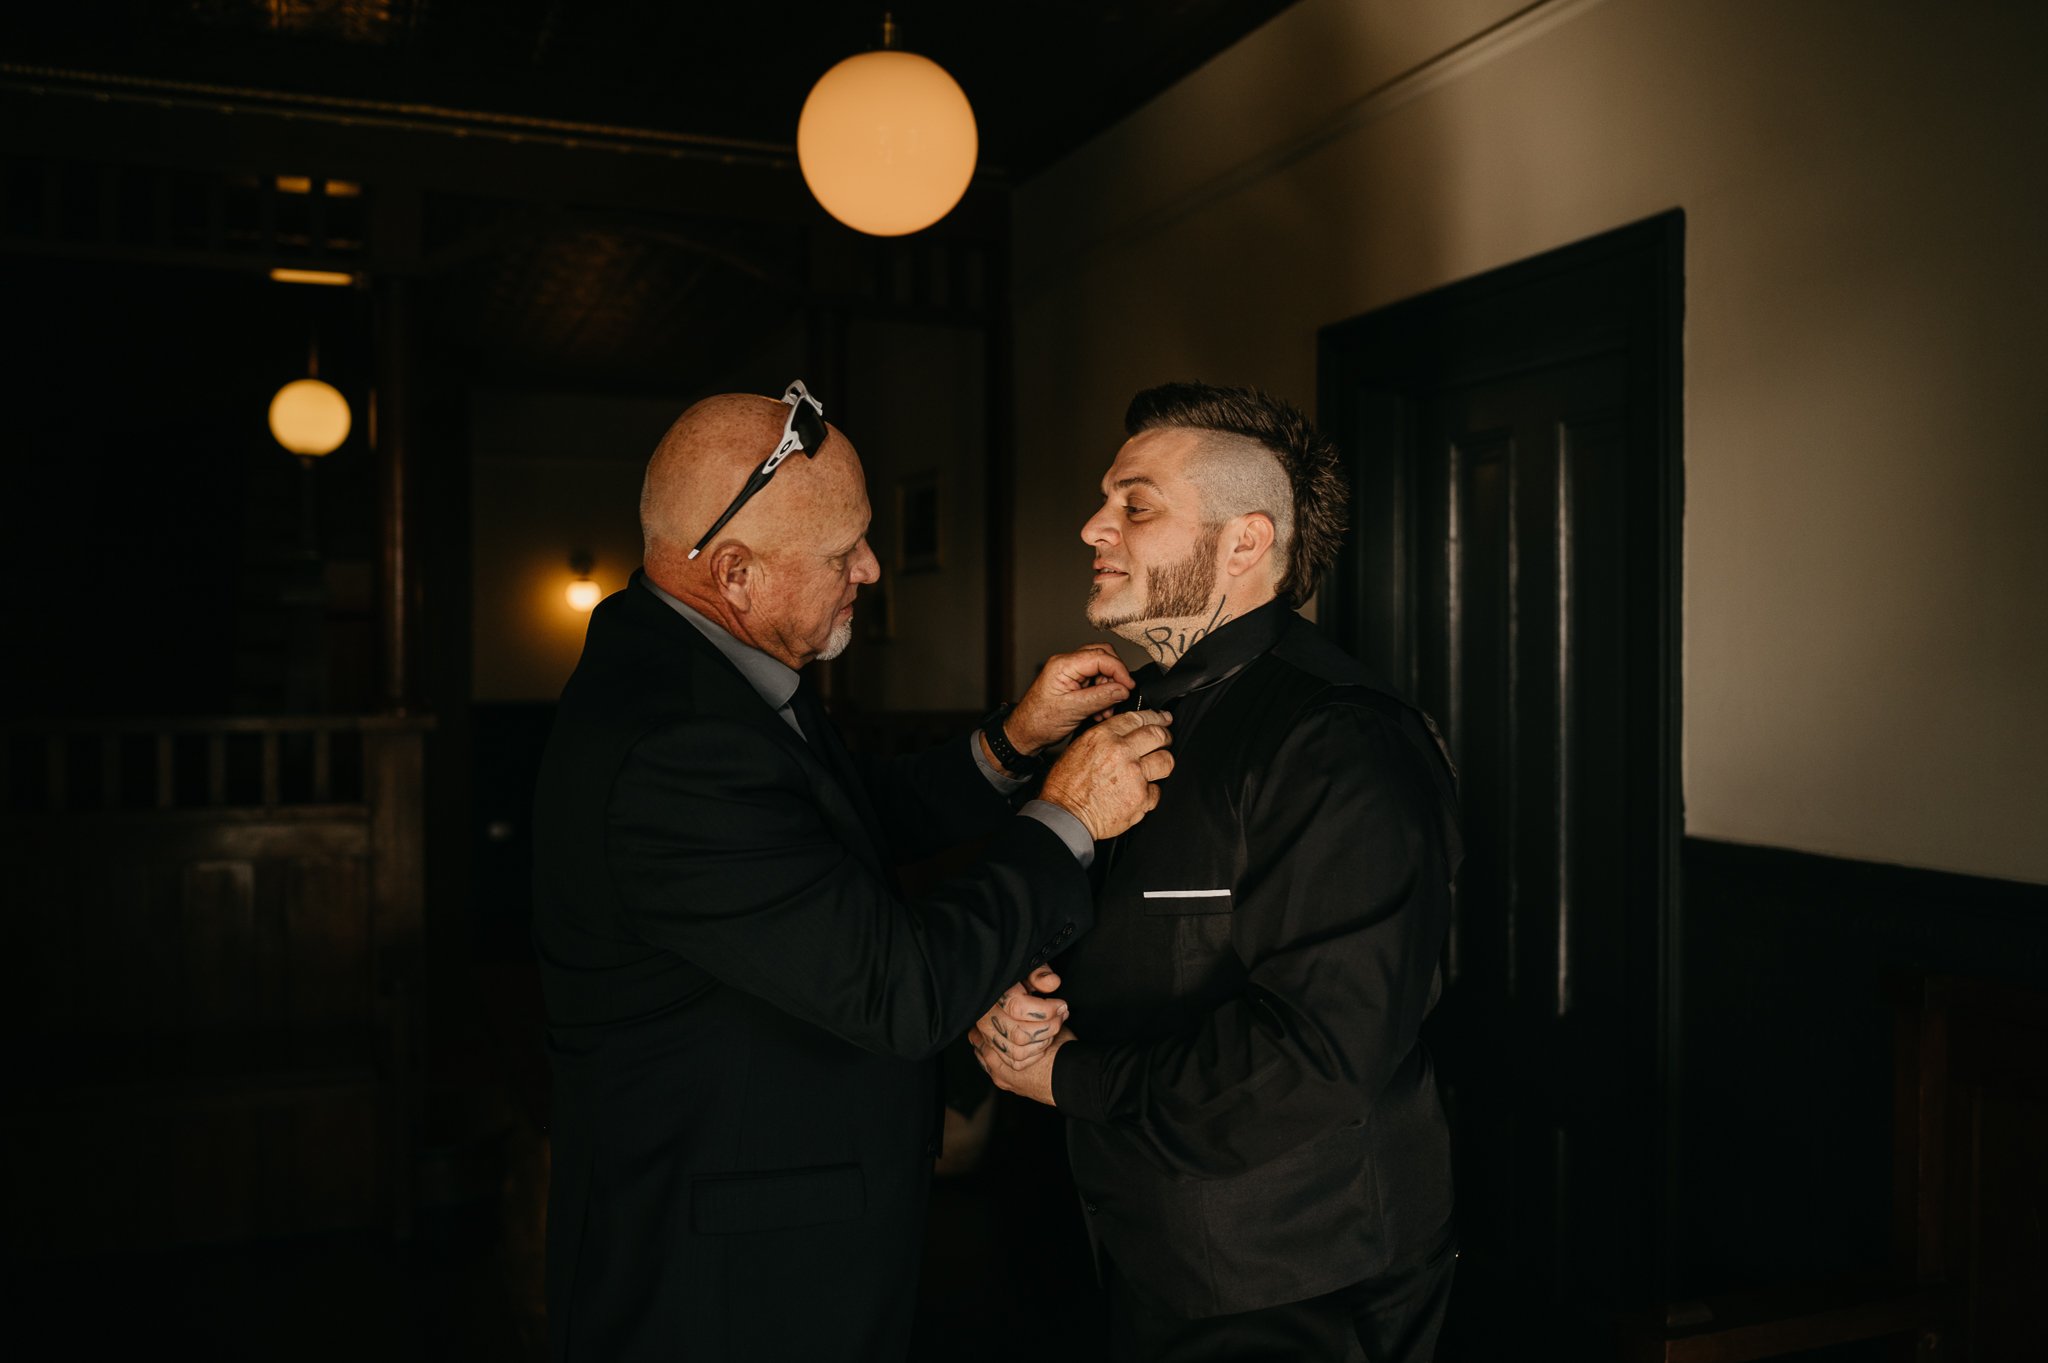 Groom getting a little help from his father fixing his tie from before wedding ceremony in Mendocino, California